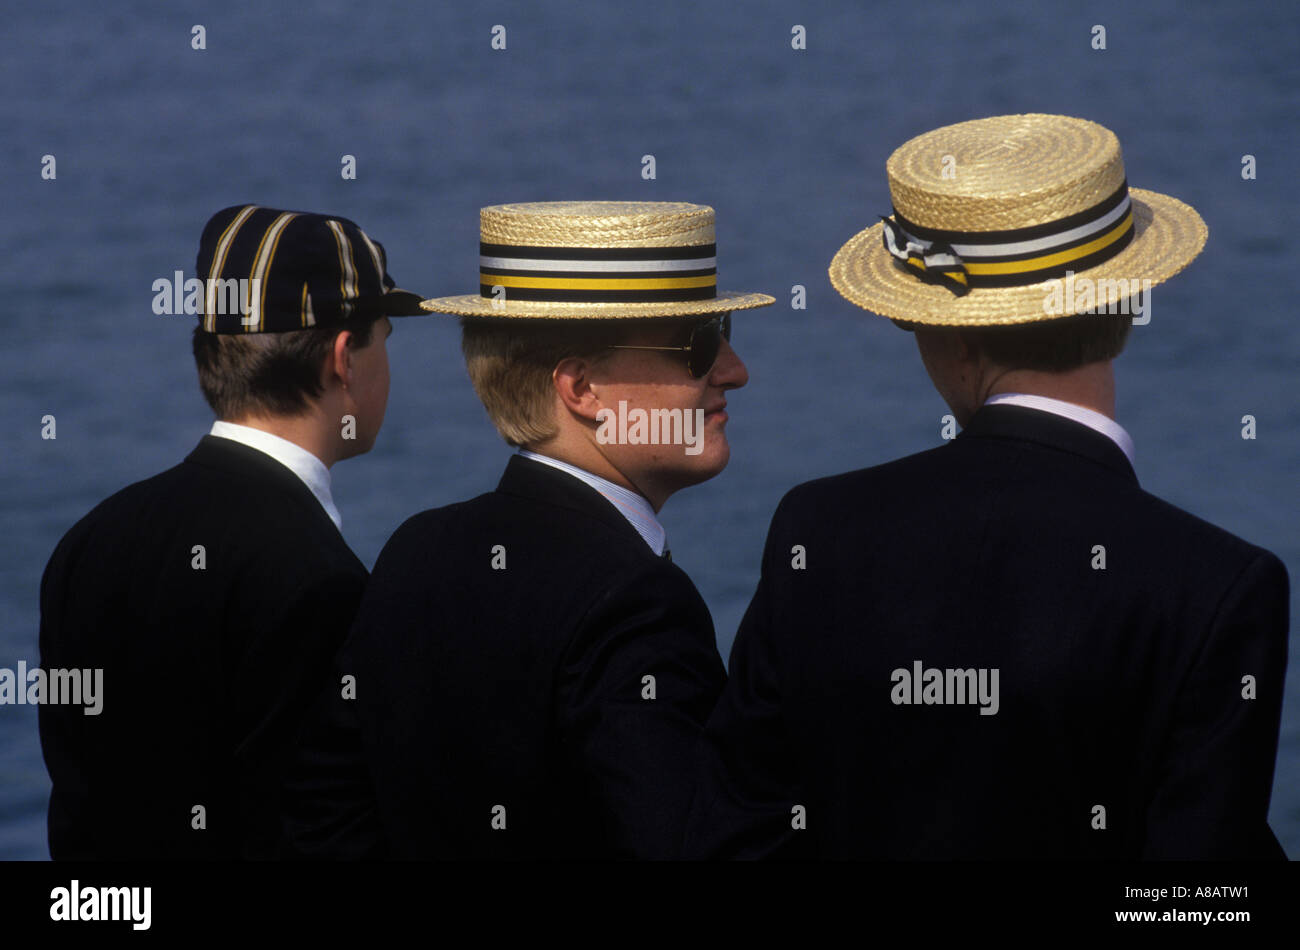 Straw boaters hat annual Henley Royal Rowing Regatta Henley on Thames Berkshire England 1980s 1985 HOMER SYKES Stock Photo